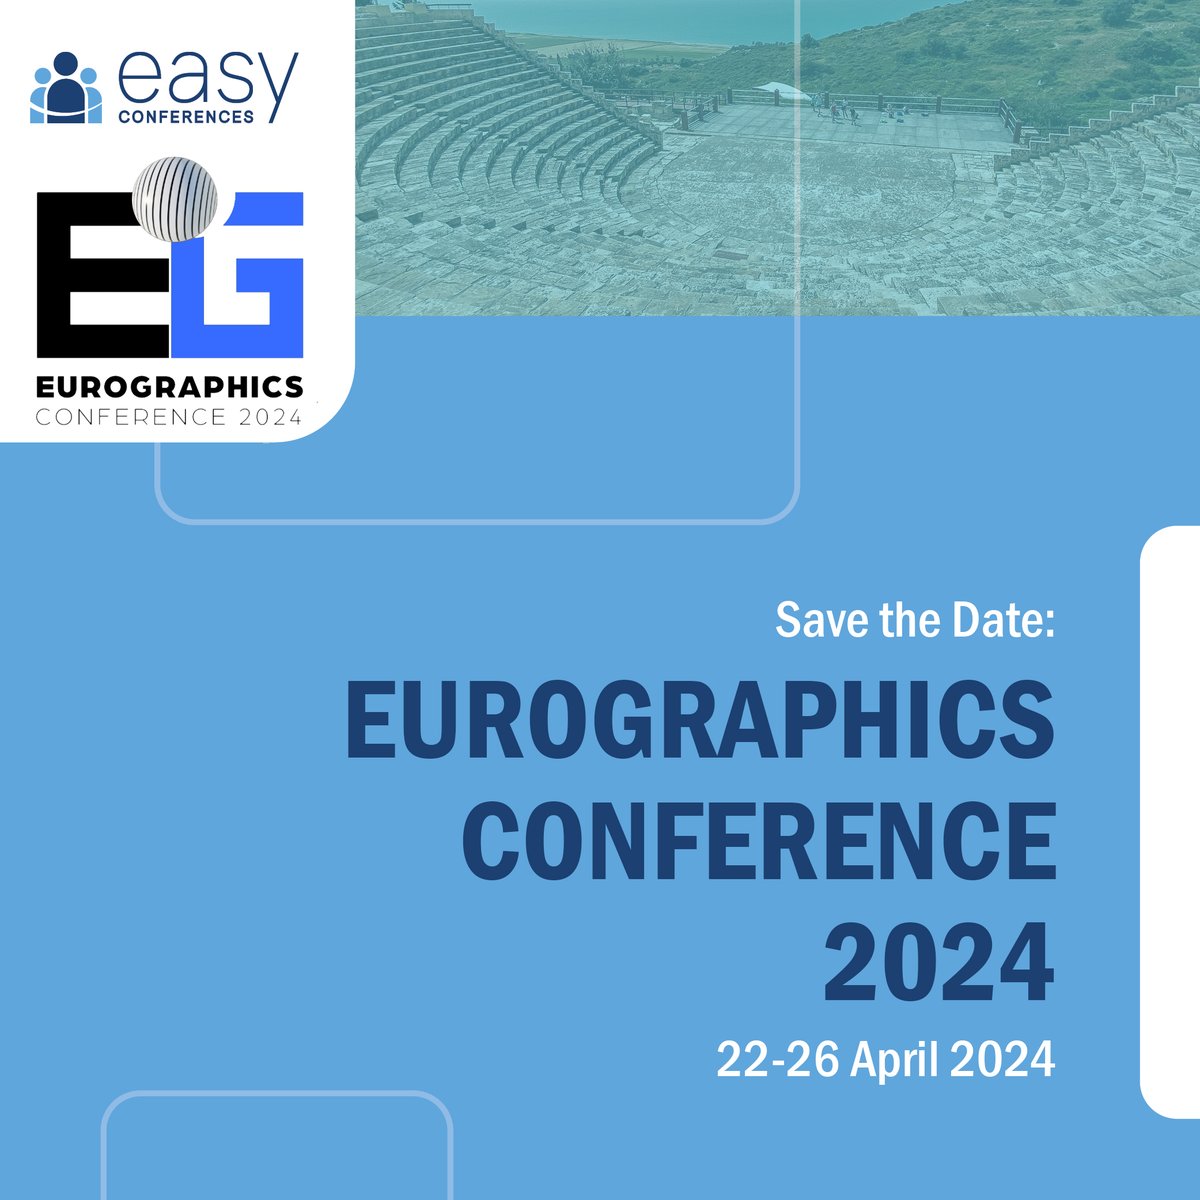 The 45th Annual Conference of the
European Association for Computer Graphics will take
place on April 22-26 in #Cyprus. It is
organized by @CYENSCoE  in collaboration with
@UCYOfficial  and @cyunitech
@cyprusuniversitytech. EasyConferences is the Coordinator.

#EuroGraphics2024